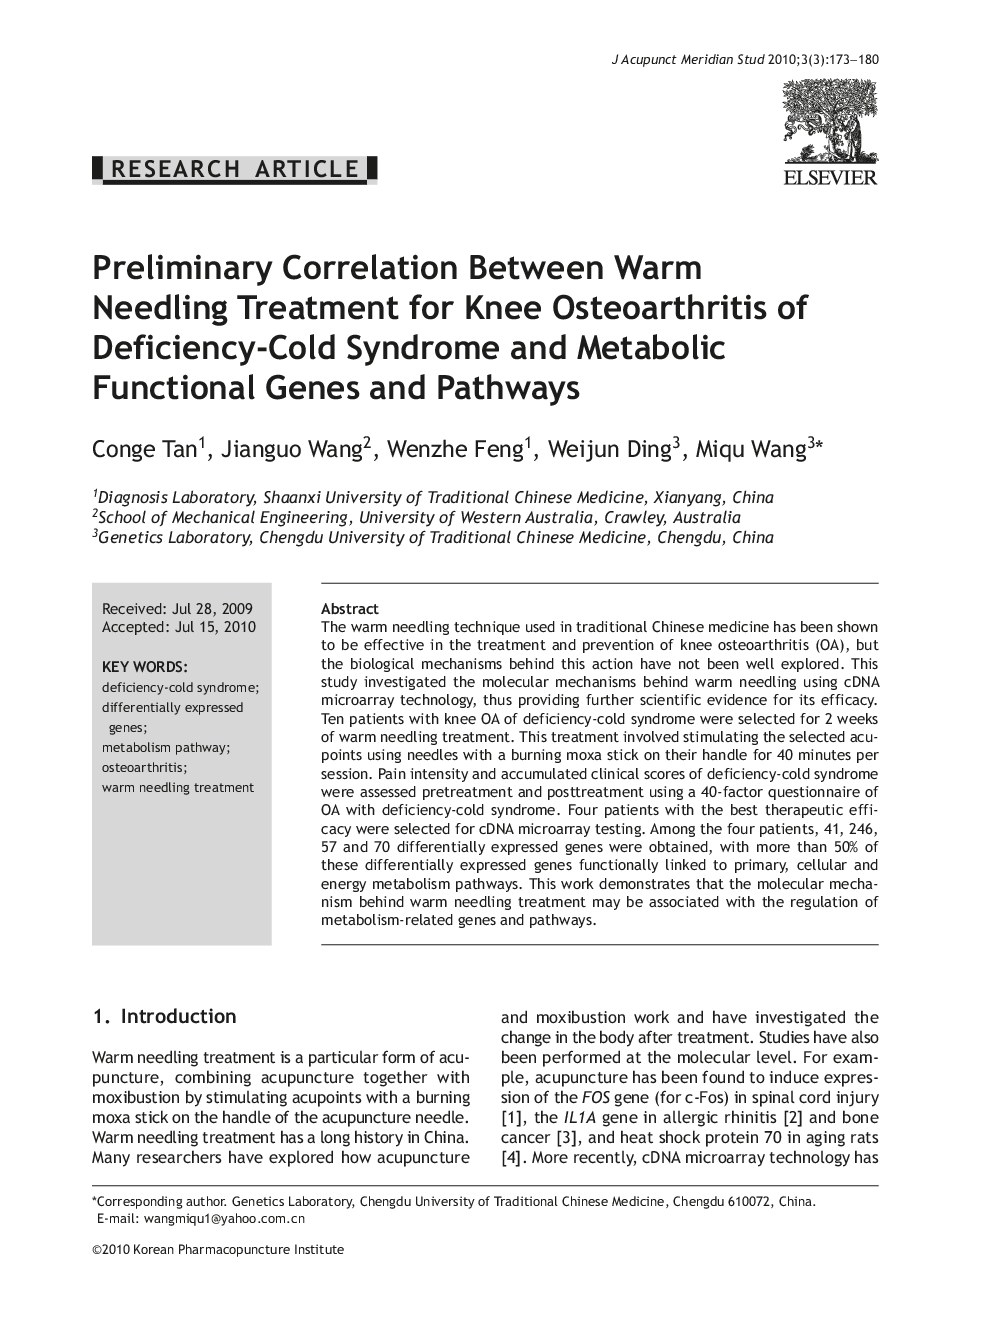 Preliminary Correlation Between Warm Needling Treatment for Knee Osteoarthritis of Deficiency-Cold Syndrome and Metabolic Functional Genes and Pathways